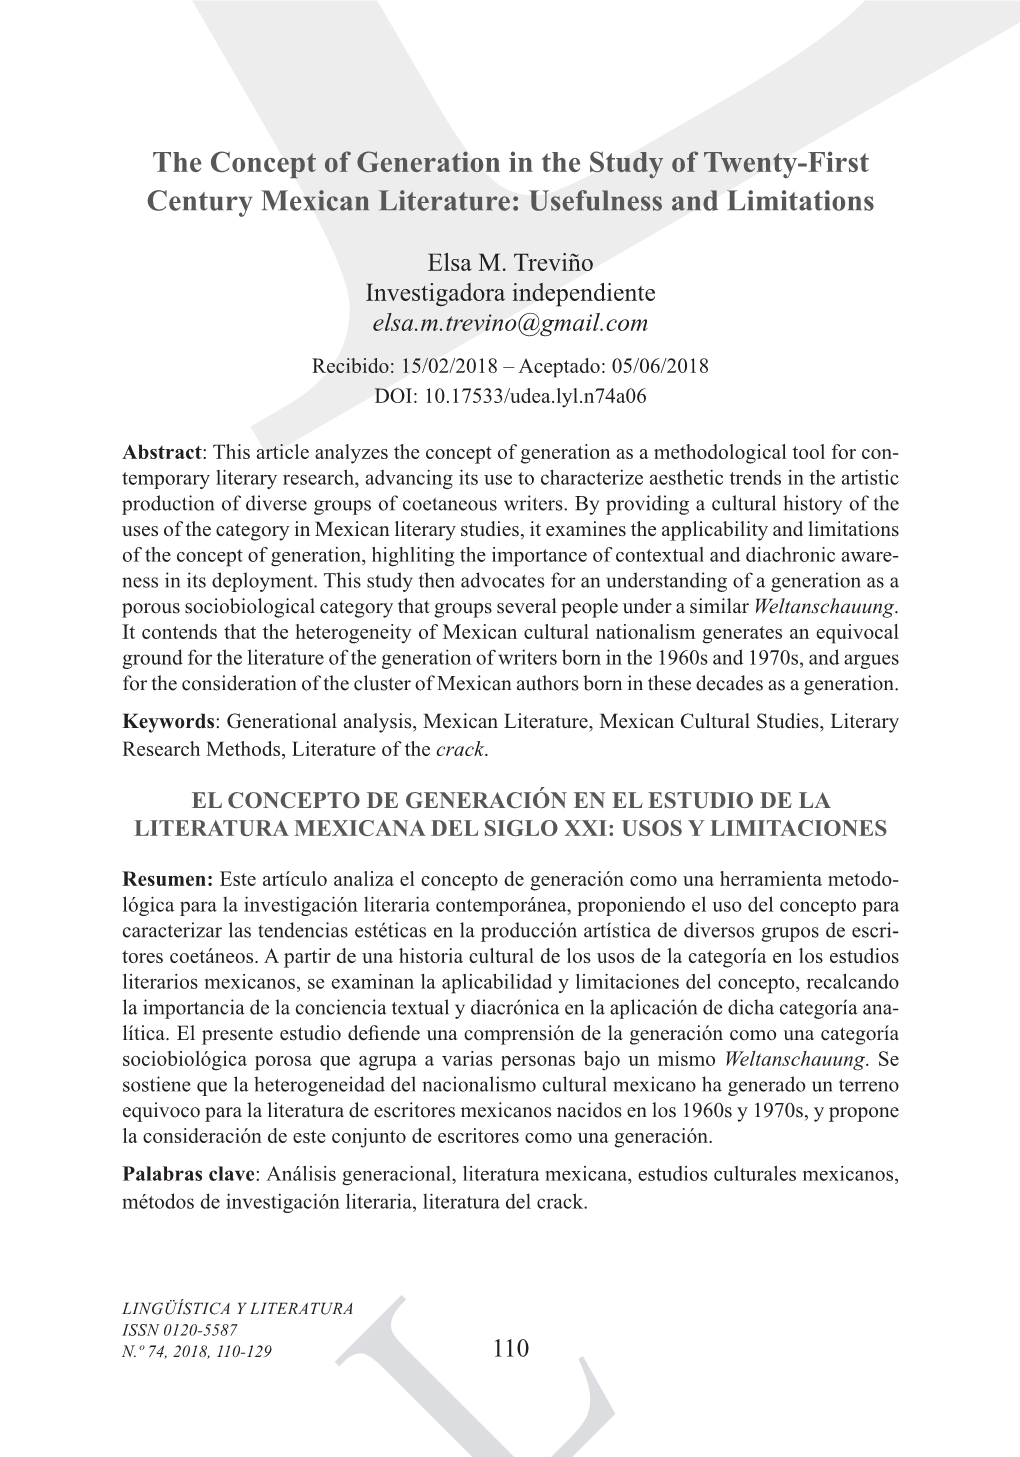 The Concept of Generation in the Study of Twenty-First Century Mexican Literature: Usefulness and Limitations